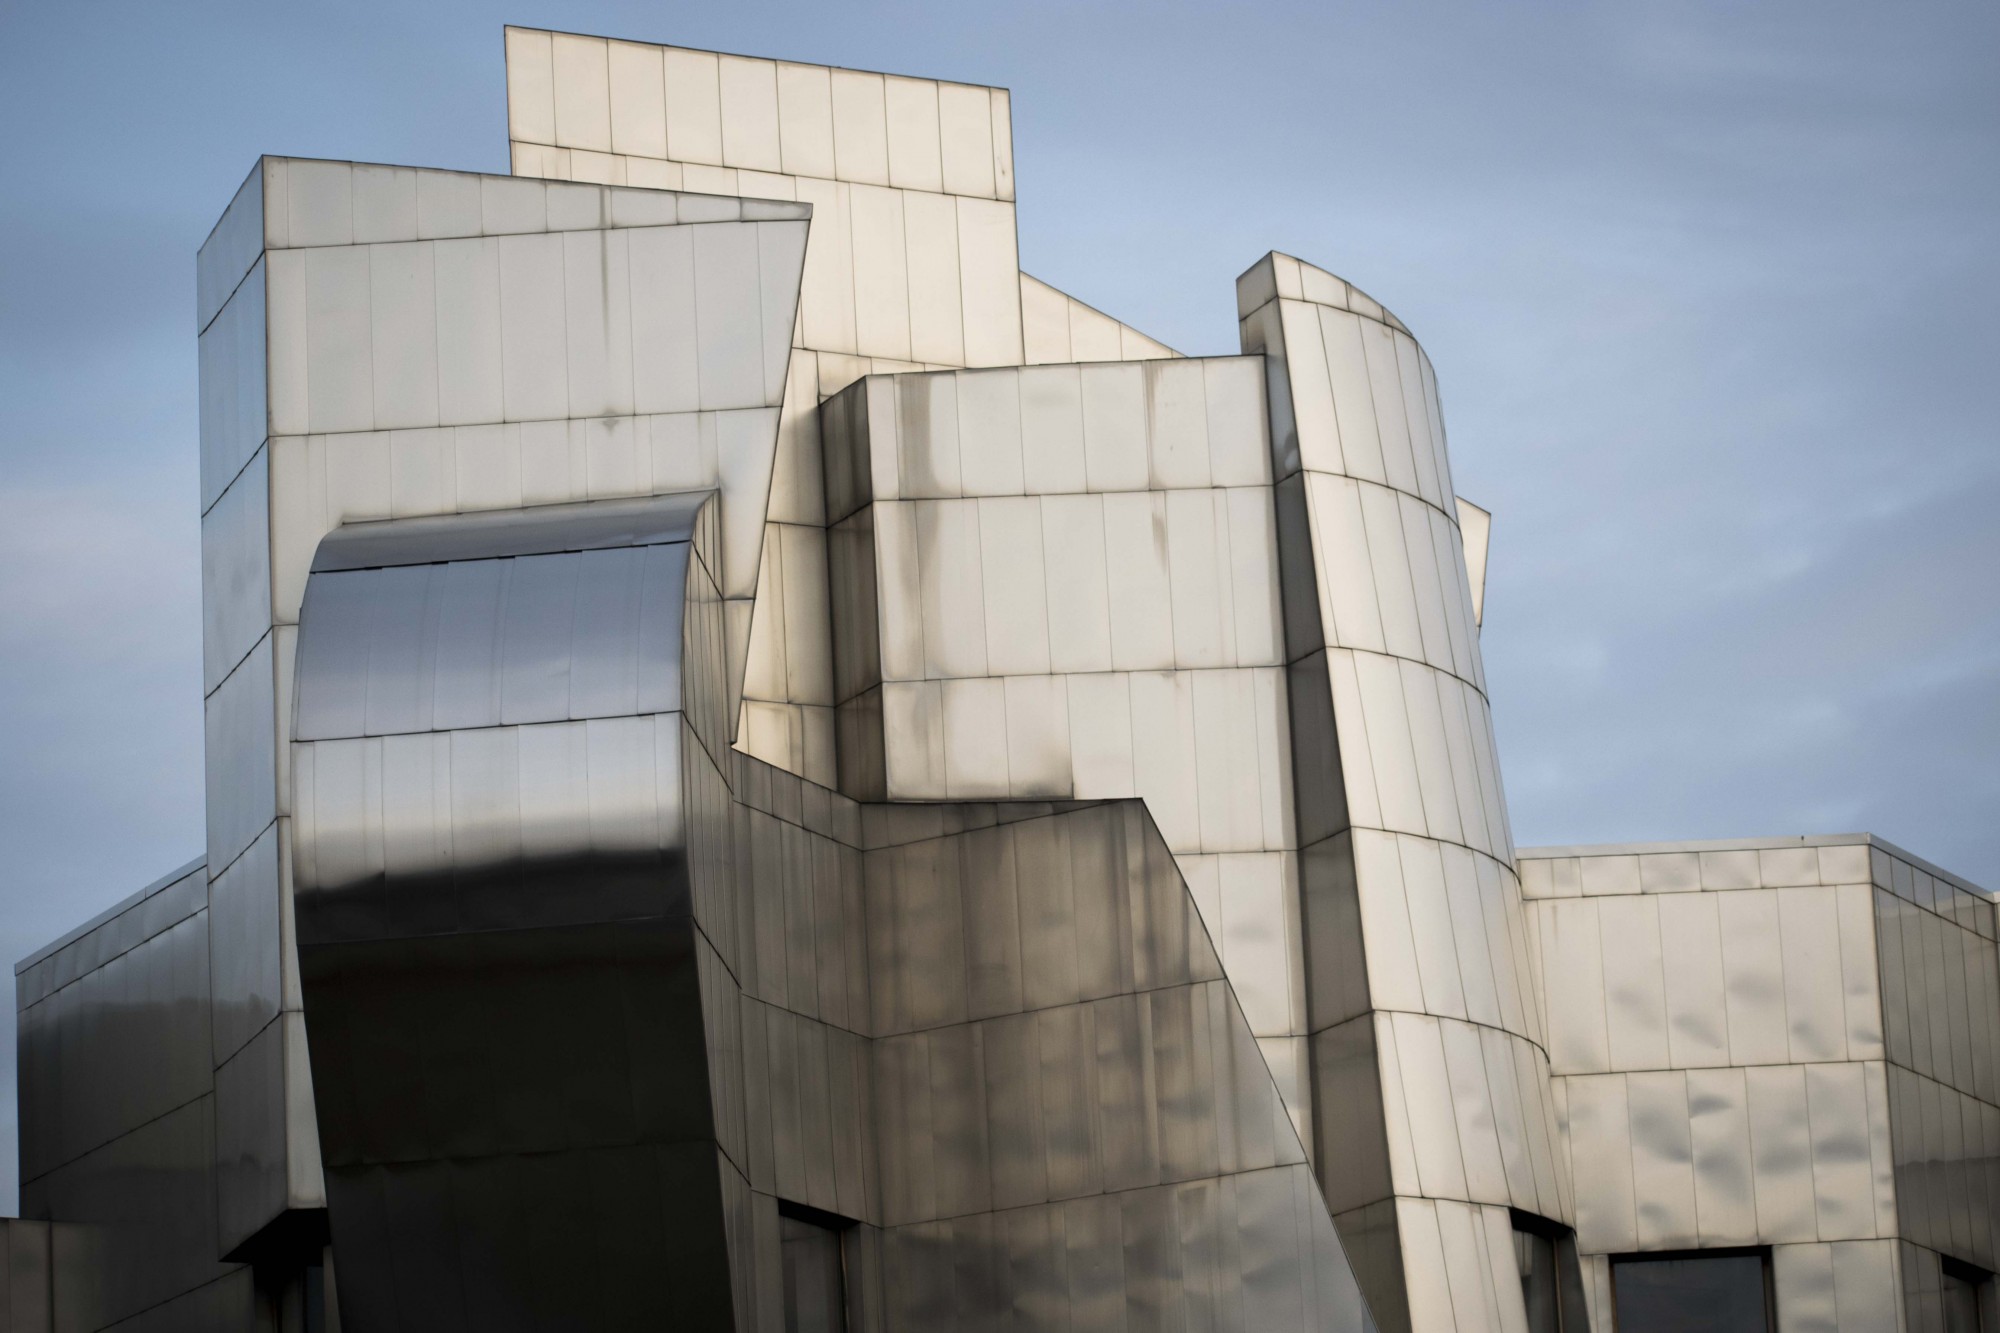 The exterior of the Weisman Art Museum, designed by Frank Gehry, as seen on Friday, Nov. 8. 